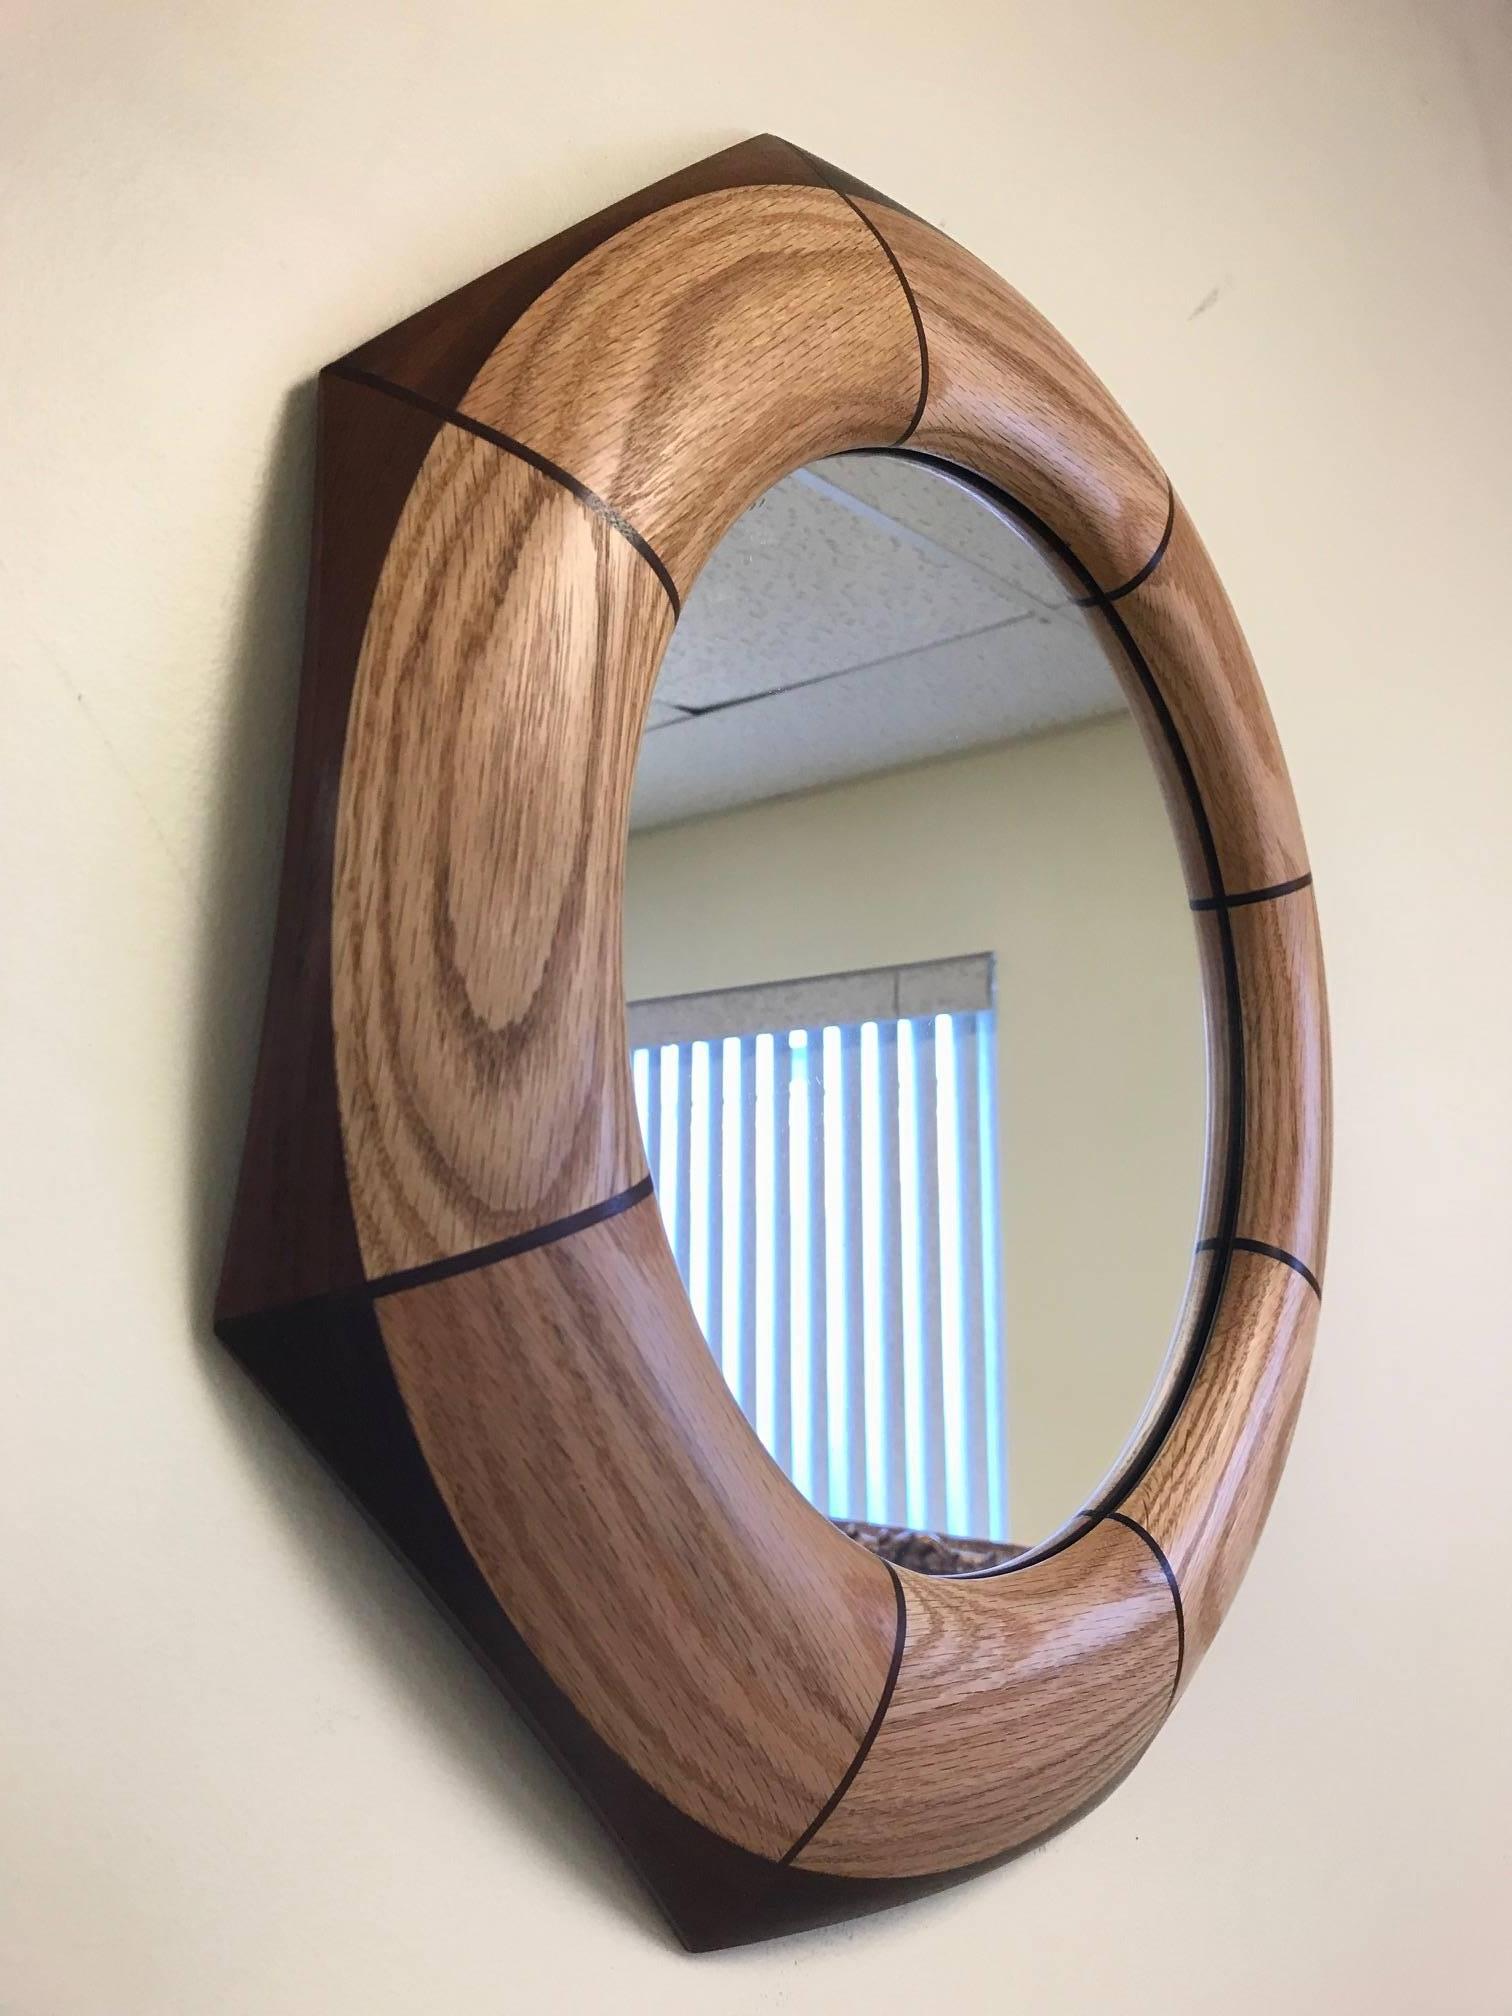 Custom octagonal walnut and oak inlay mirror.
The mirror listed is currently available.